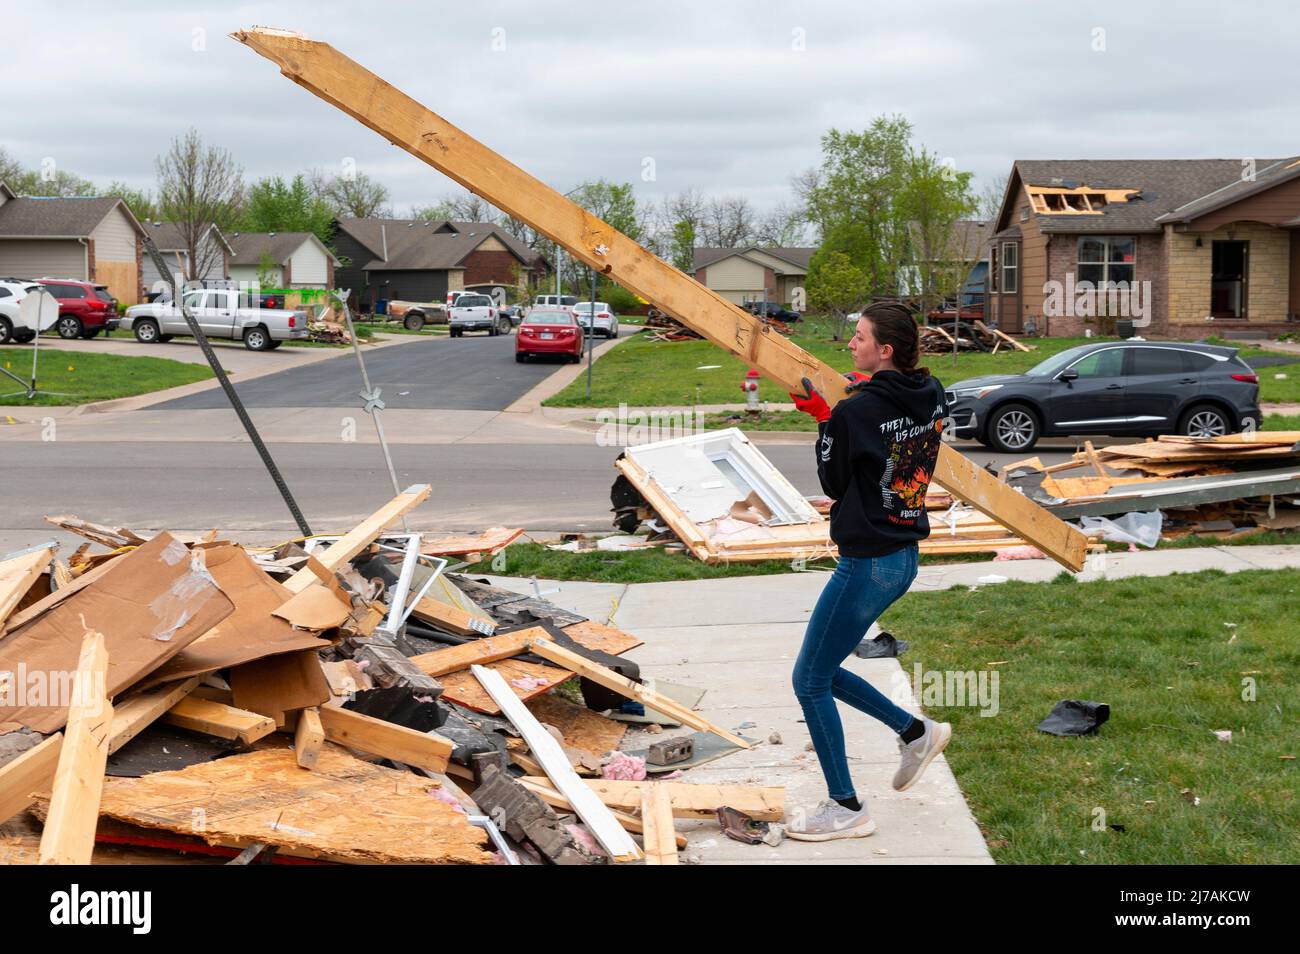 Andover, United States of America. 29 April, 2022. U.S. Air Force airmen work alongside residents to clean up damaged homes in the aftermath of an EF-3 tornado, April 29, 2022, in Andover, Kansas. The tornado damaged hundreds of buildings in the Wichita suburb.  Credit: Airman Brenden Beezley/U.S. Air Force Photo/Alamy Live News Stock Photo